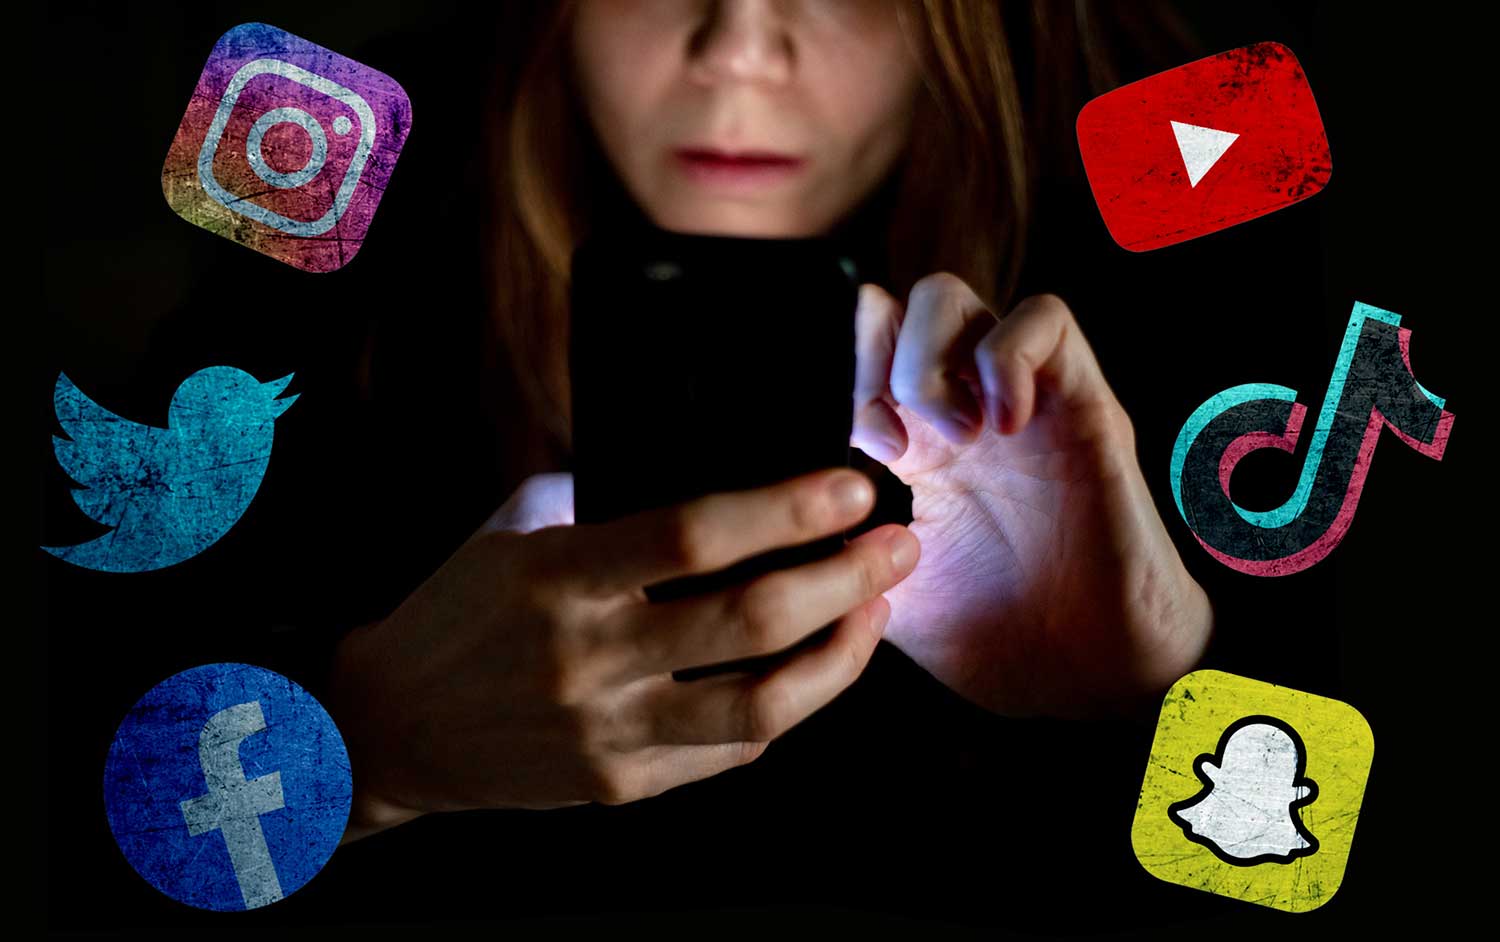 A woman uses her phone in a darkened space with the logos of various platforms on either side of her.